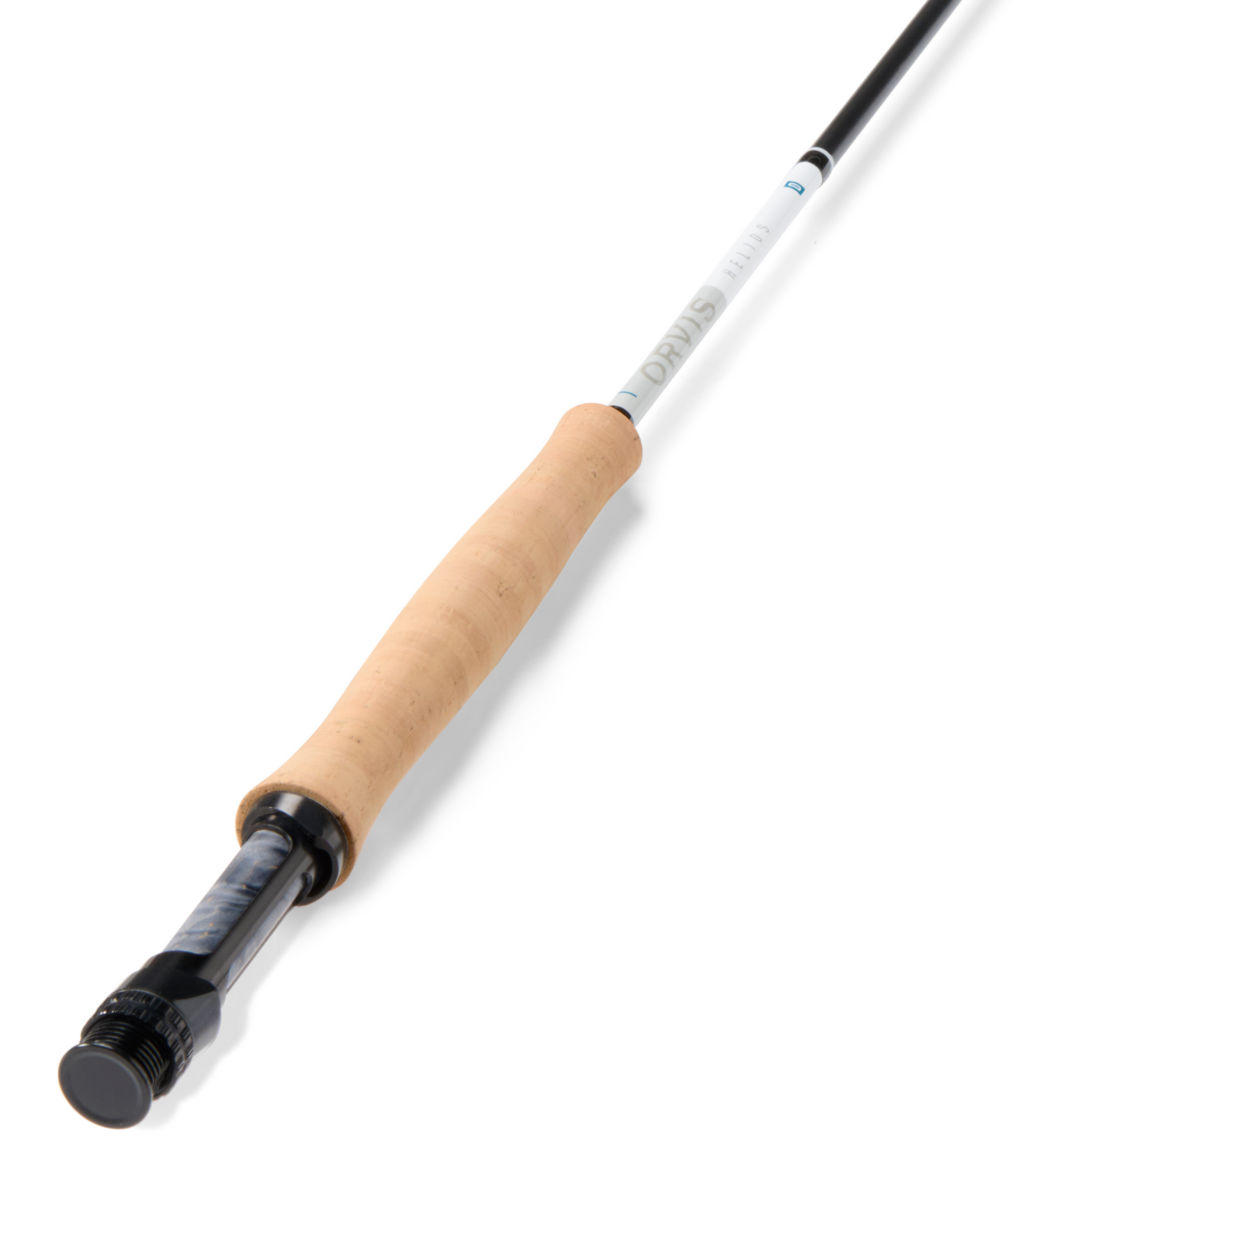 Helios™ D 10' 4-Weight Fly-Fishing Rod Black Size 4-Weight. 10' Graphite Orvis